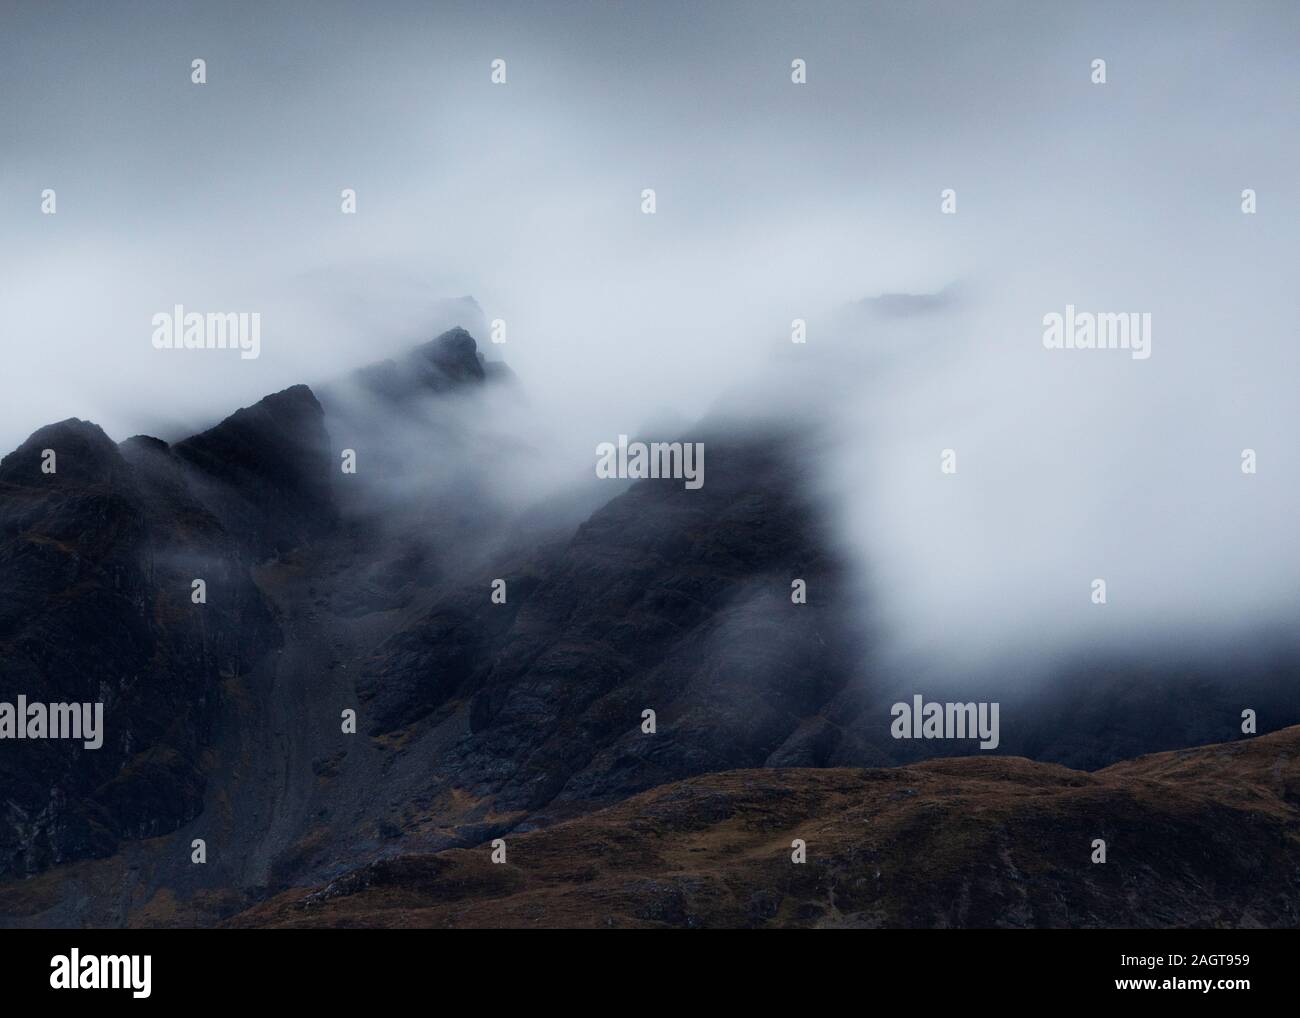 Photograph by © Jamie Callister. The Cuillin Mountains, Isle of Skye, North West Scotland, UK, 27th of November, 2019. Stock Photo